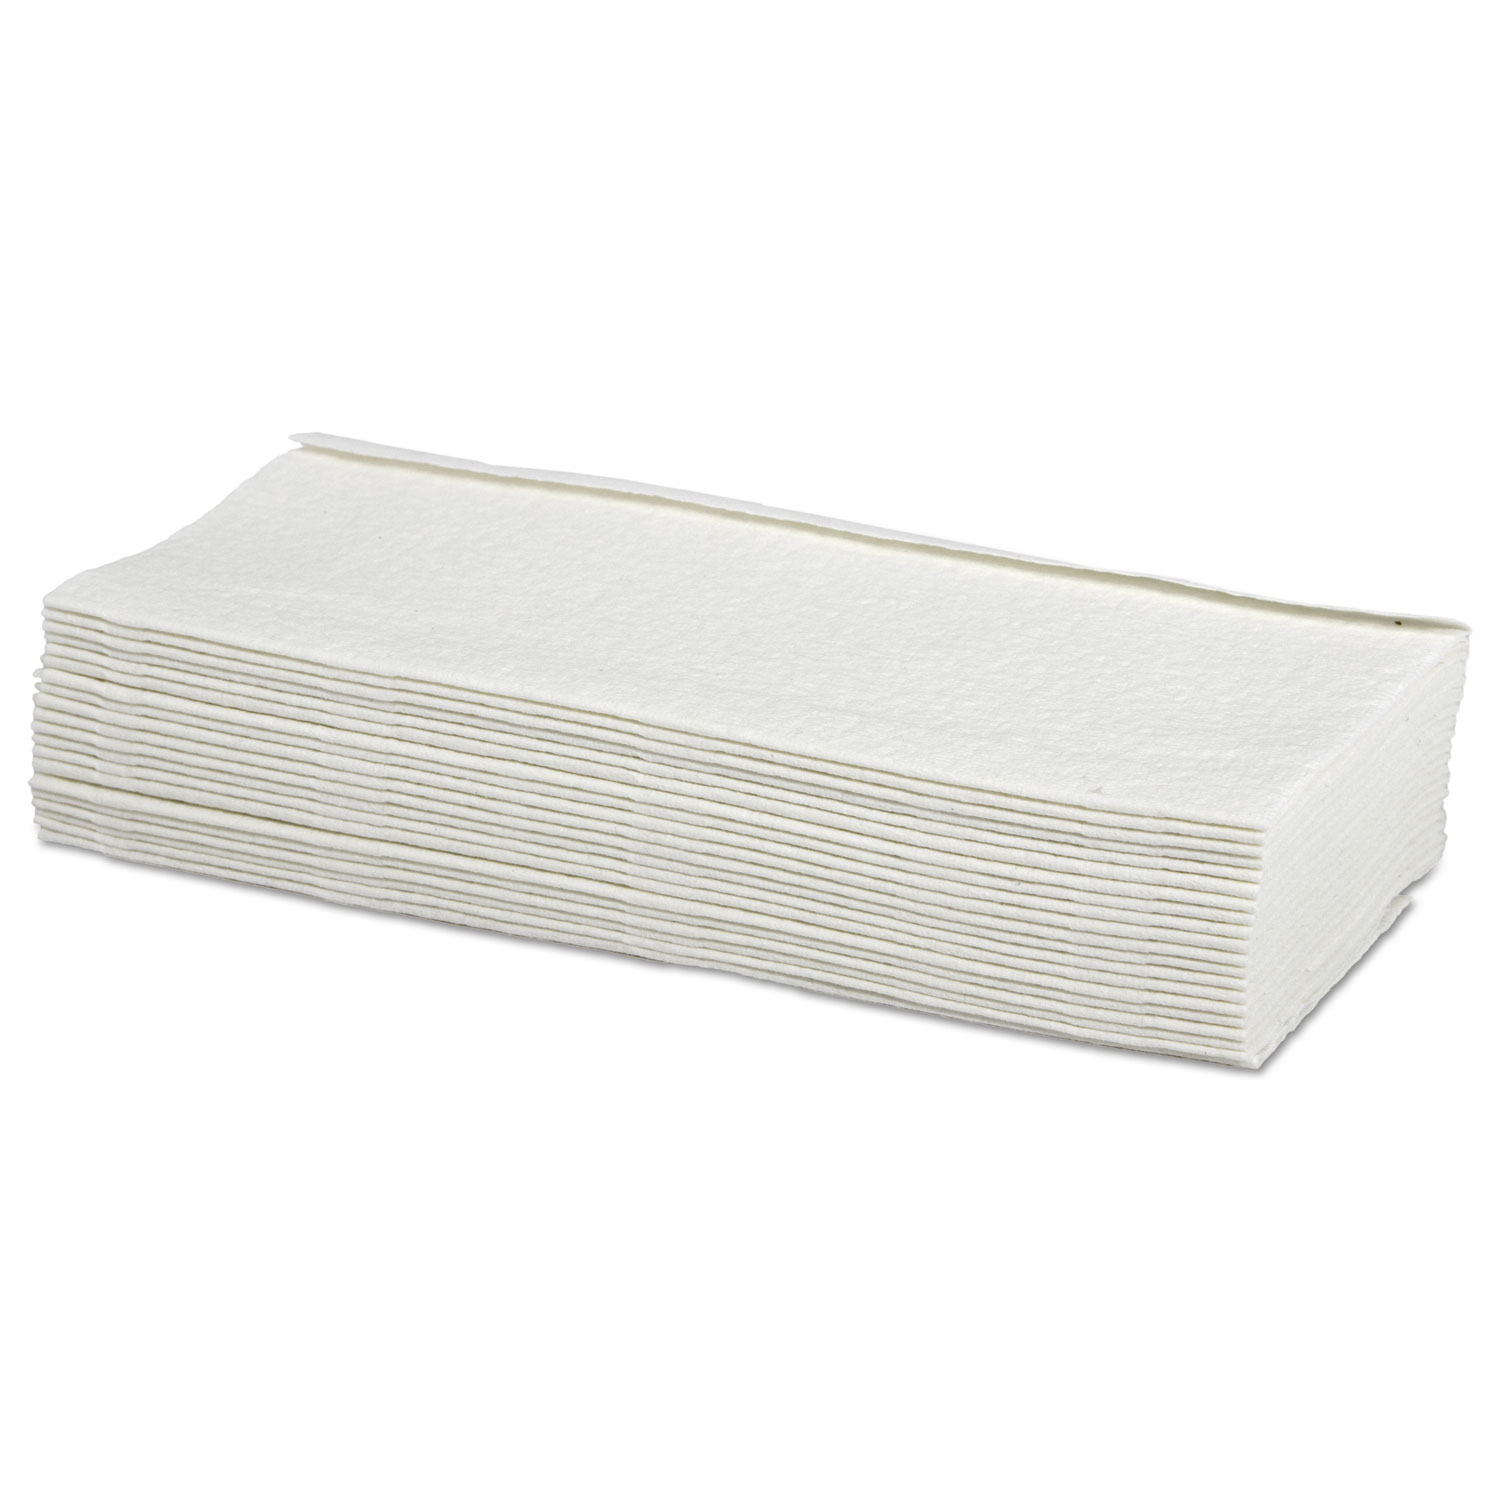 DRC Wipers, White, 9 x 16 1/2, 9 Dispensers of 100, 900/Carton